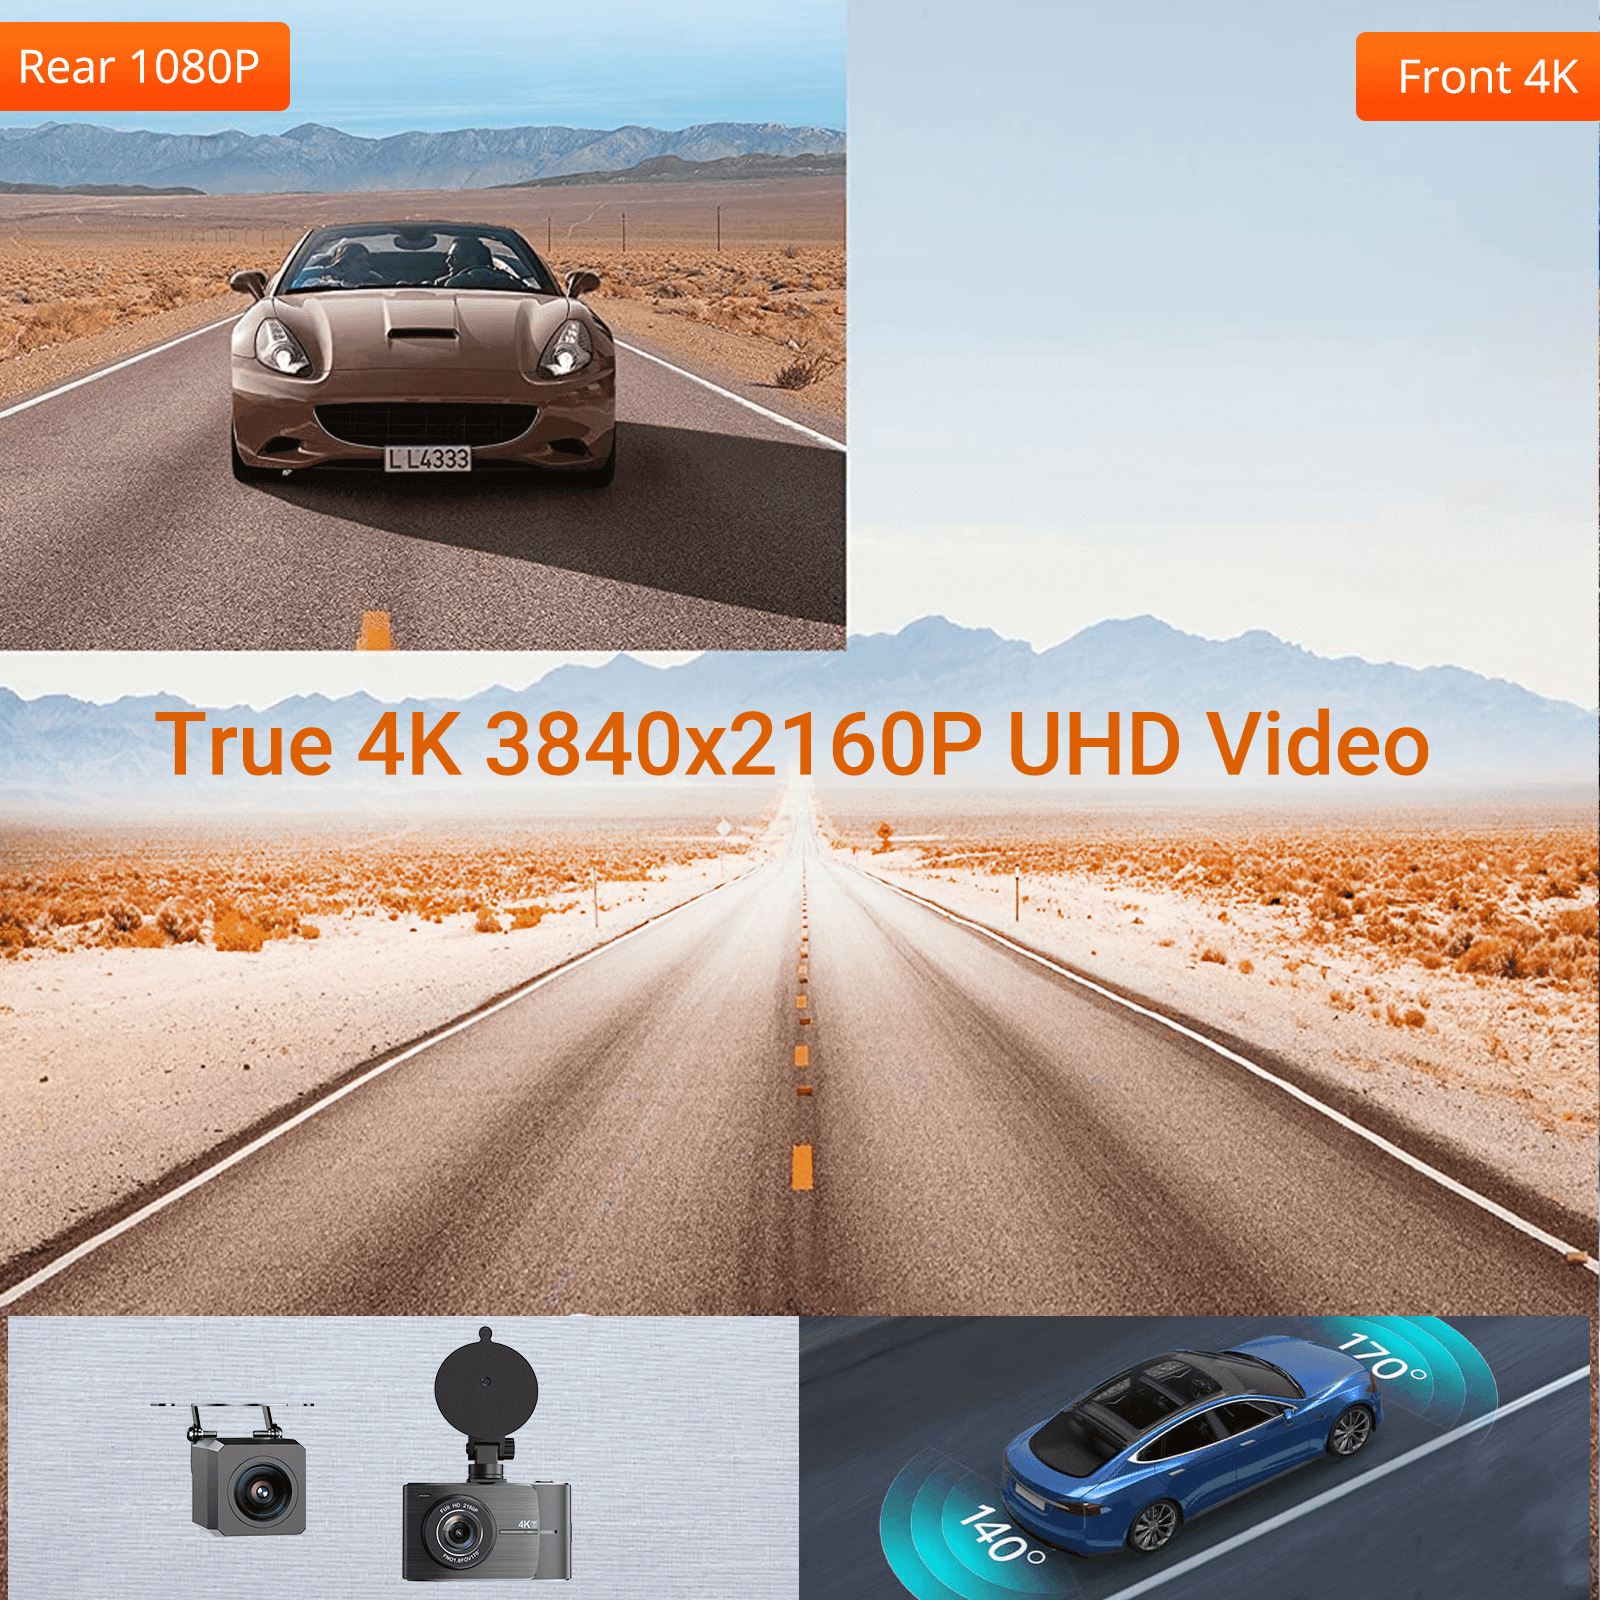 Cost-effective and Most worthwhile XGODY J402 Pro Dash Cam | 4K + 1080P Dual Lens, 24-Hour Monitoring, Night Vision - XGODY 